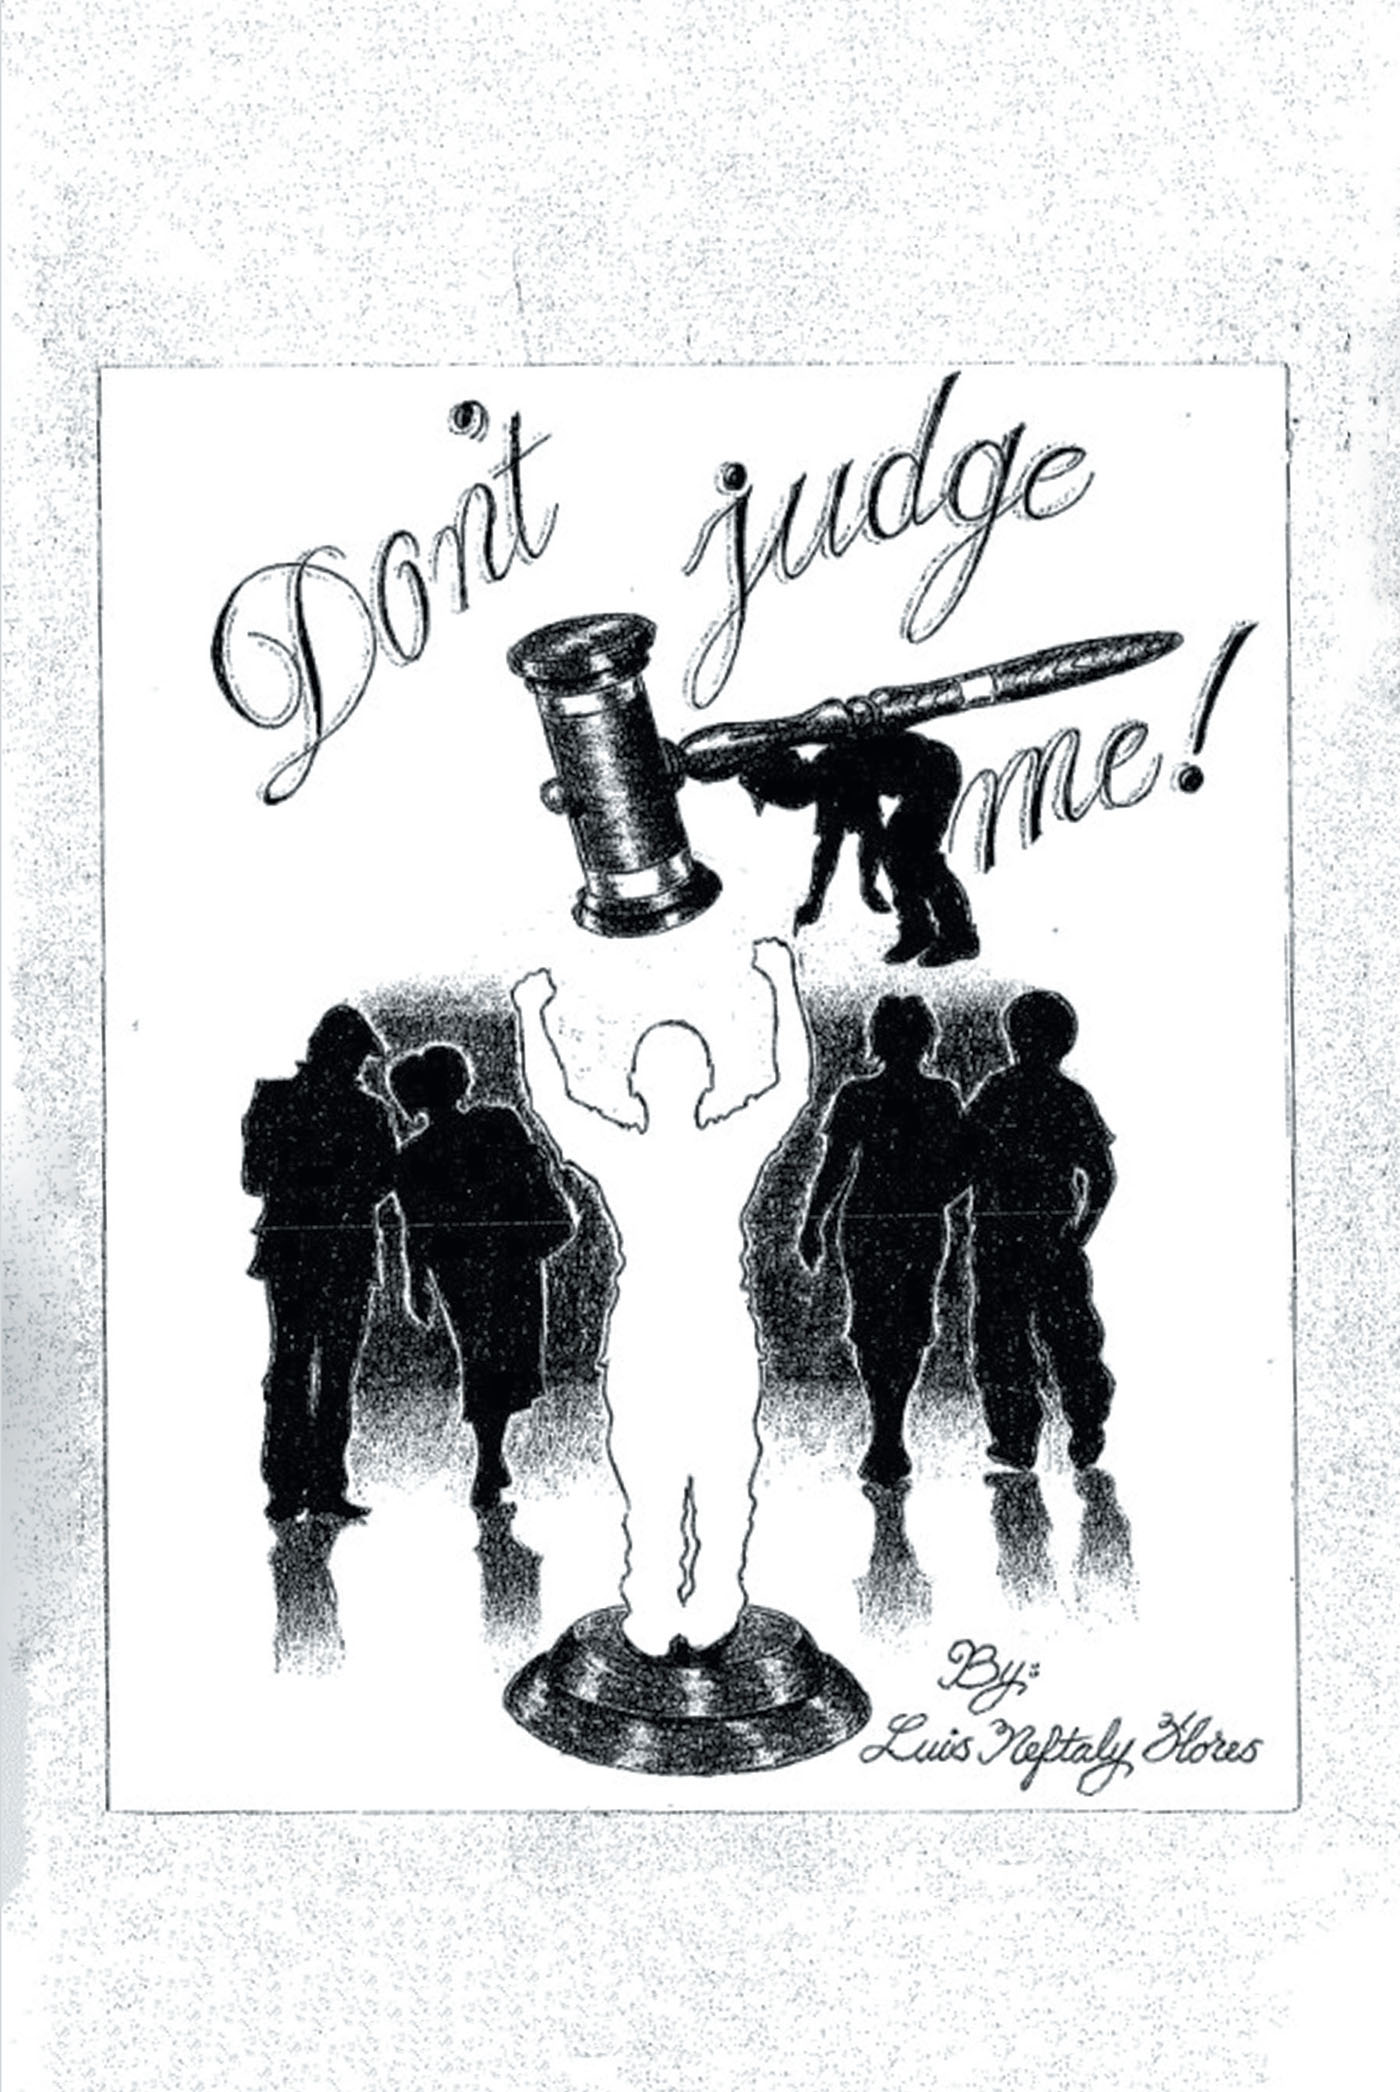 Luis Neftaly Flores’s Newly Released "Don’t Judge Me!" is an Engaging Memoir That Takes Readers to the Heart of a Redemption Journey